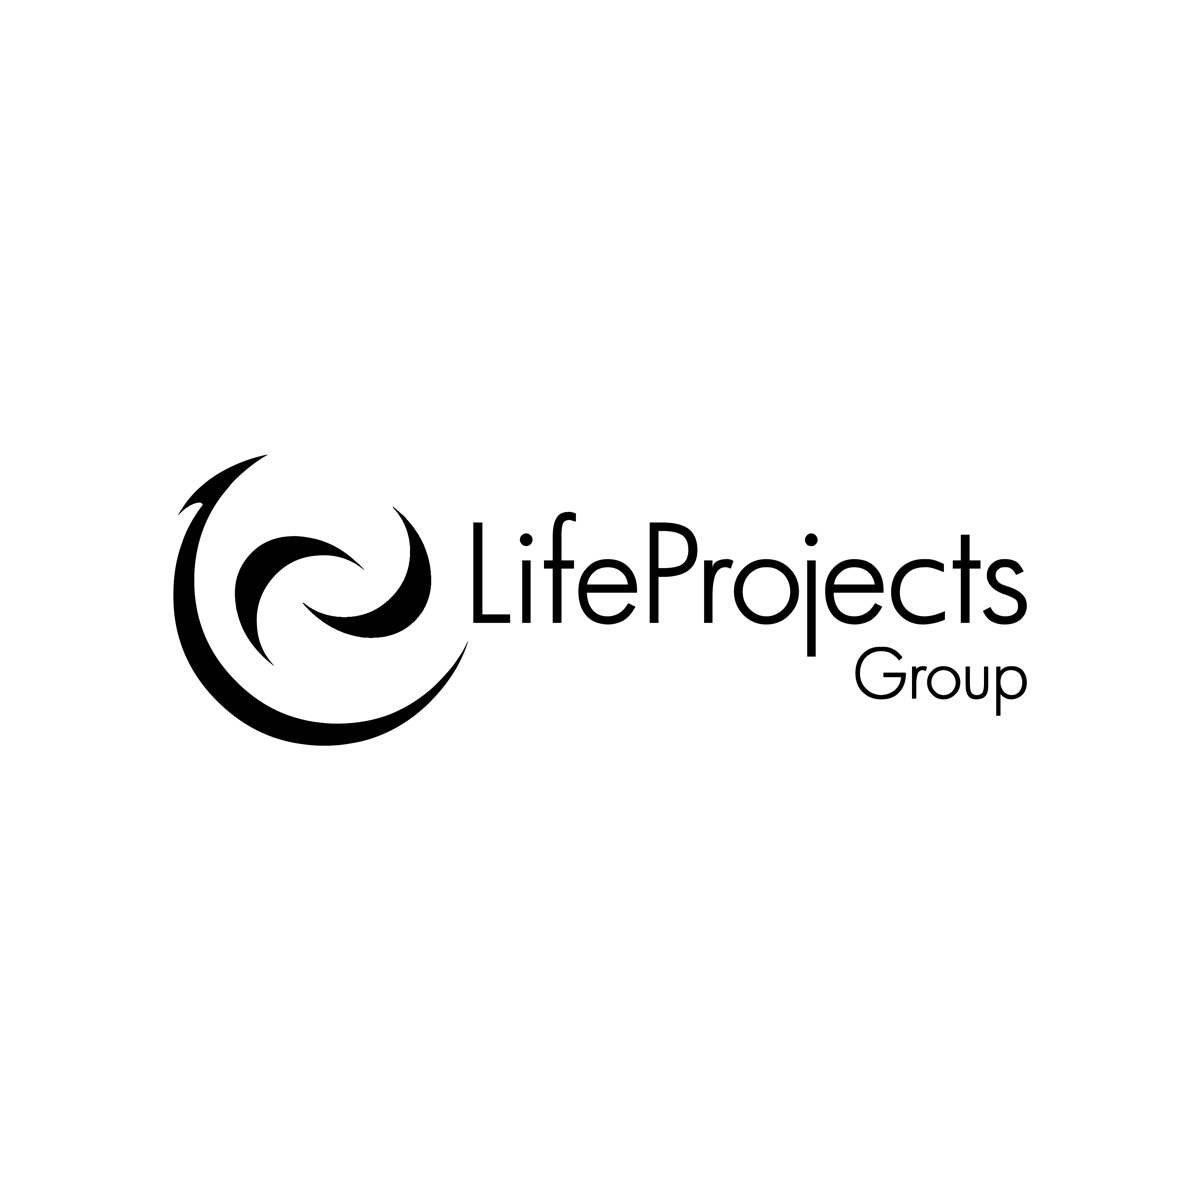 LifeProjects Group